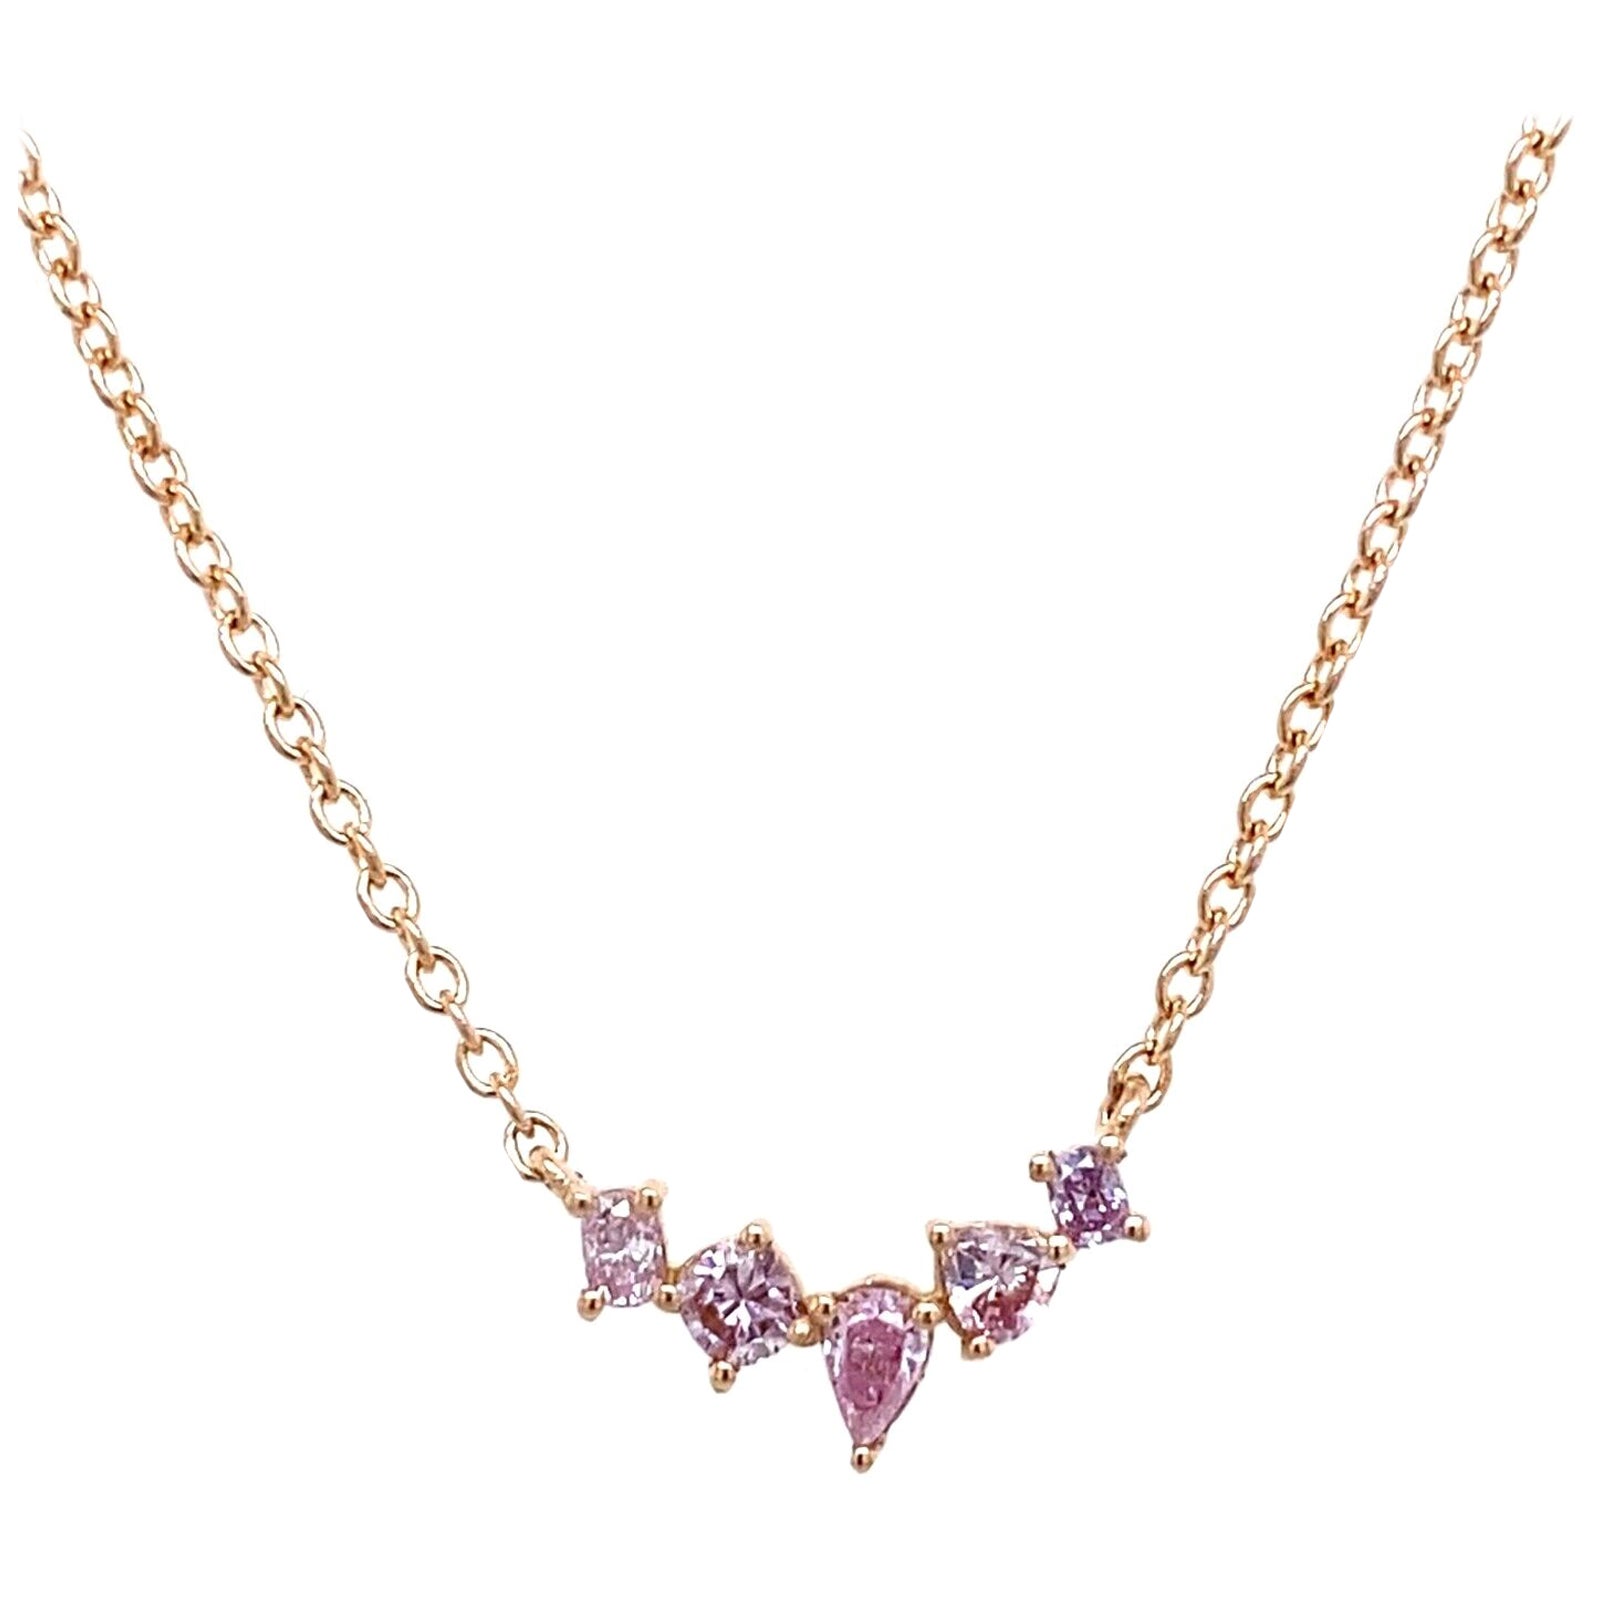 5-Stone Natural Pink Intense Diamond Necklace in 18ct Yellow Gold